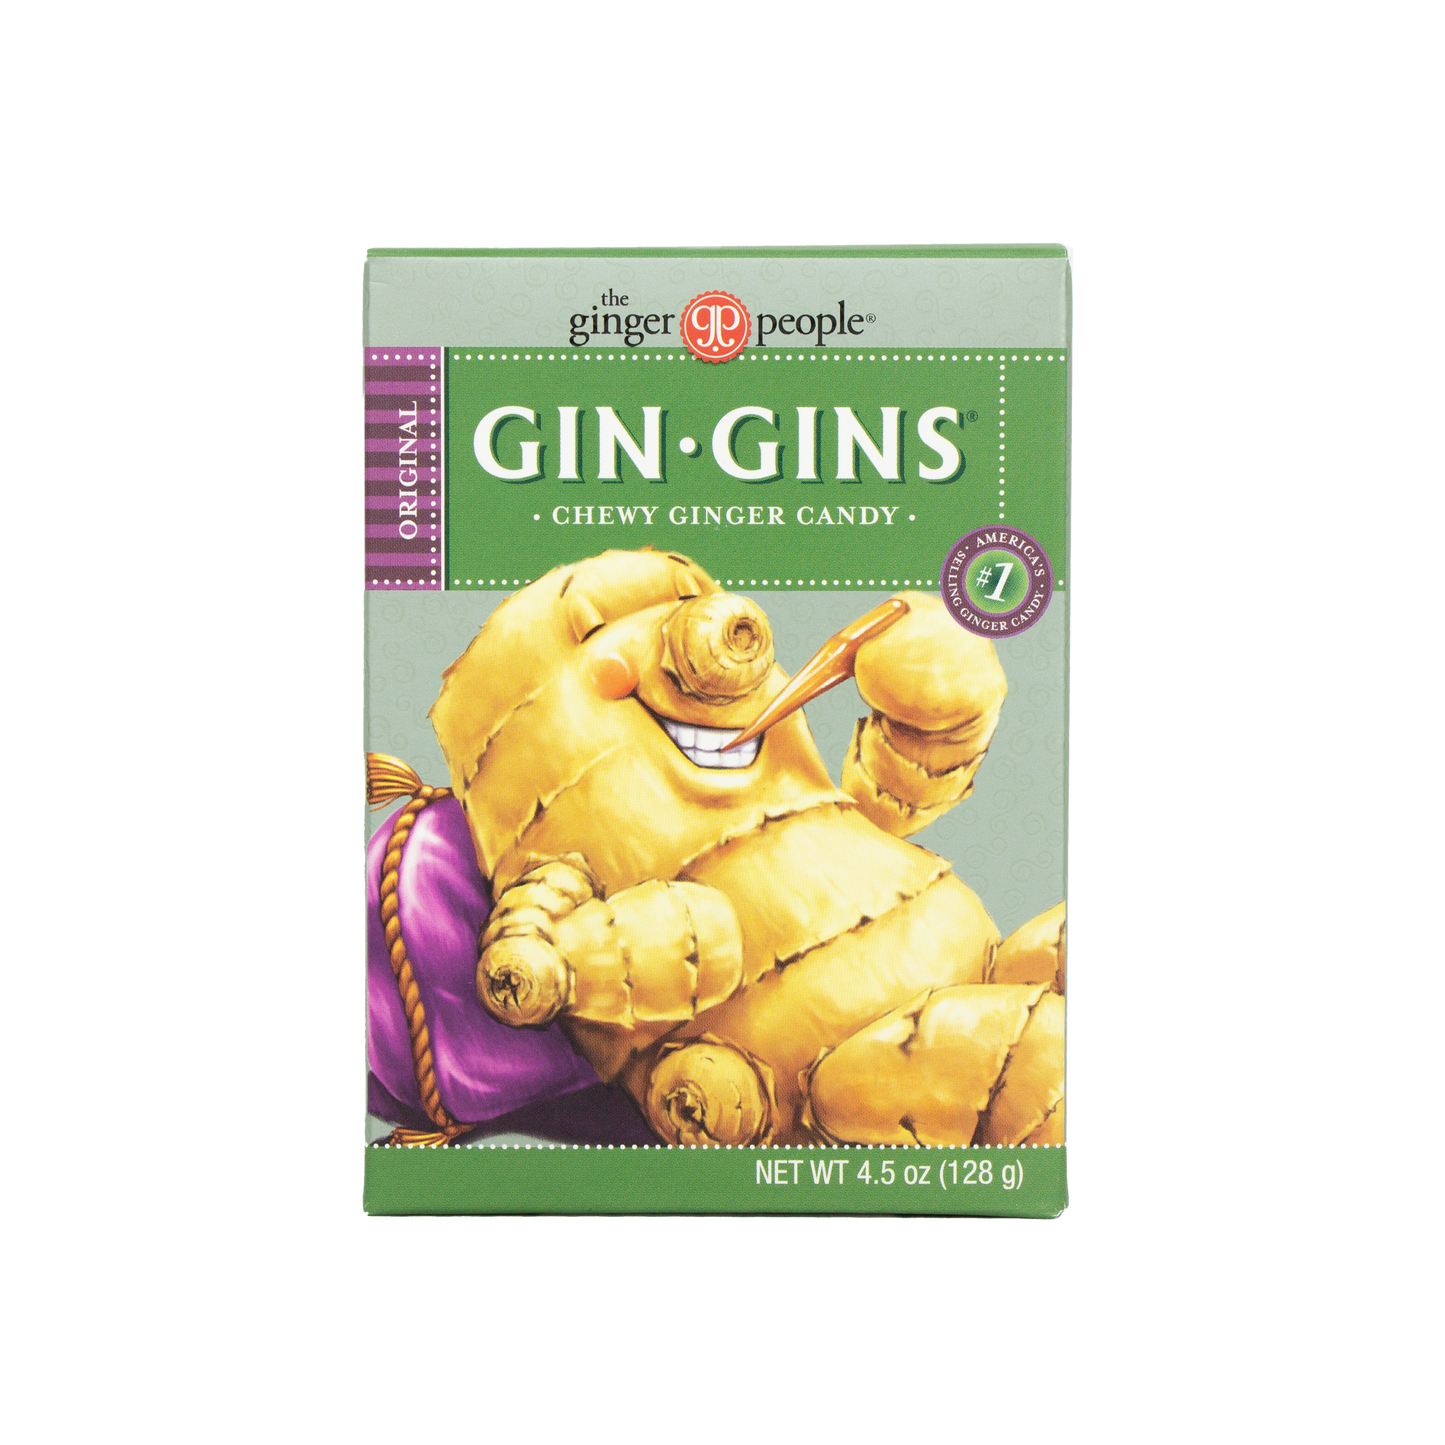 The Ginger People - Gin Gins Chewy Ginger Candy Travel Pack